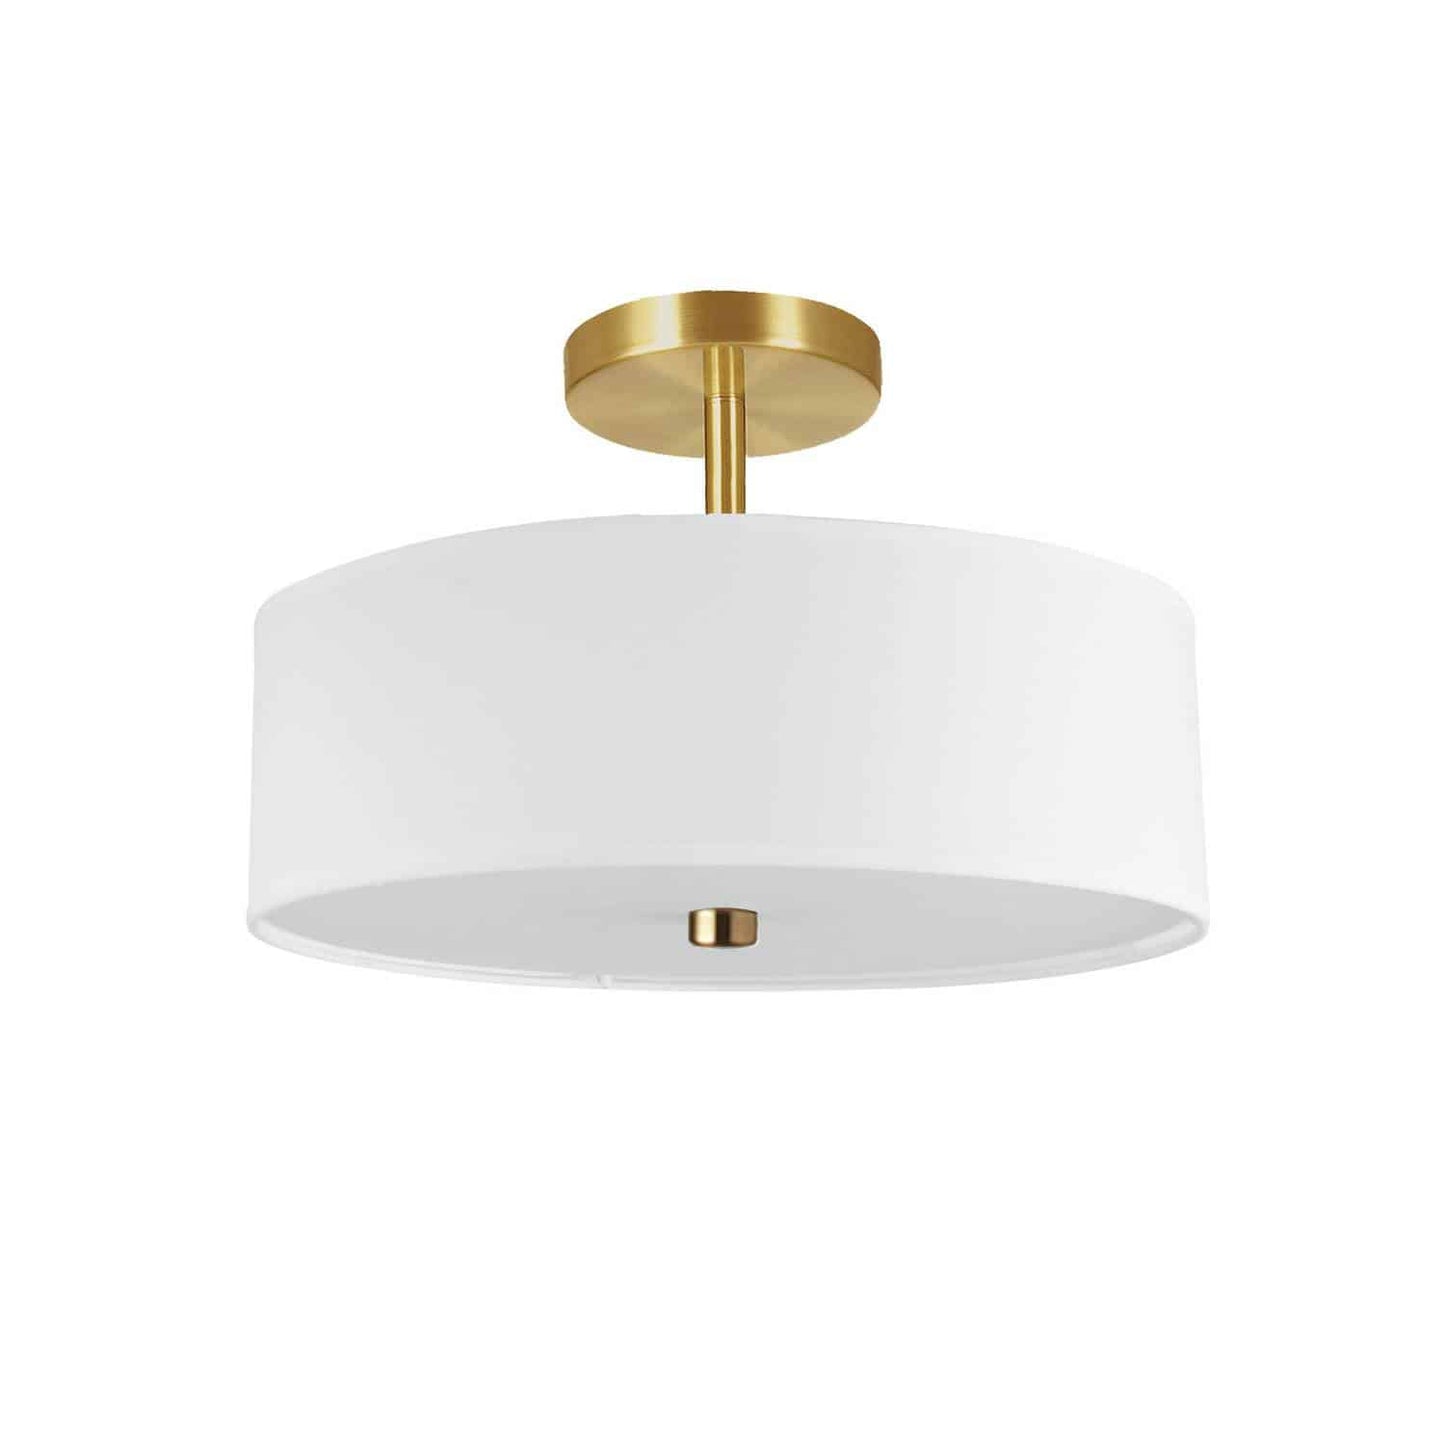 Dainolite 571-143SF-AGB-WH 3 Light Incandescent Semi-Flush Mount Aged Brass with White Shade